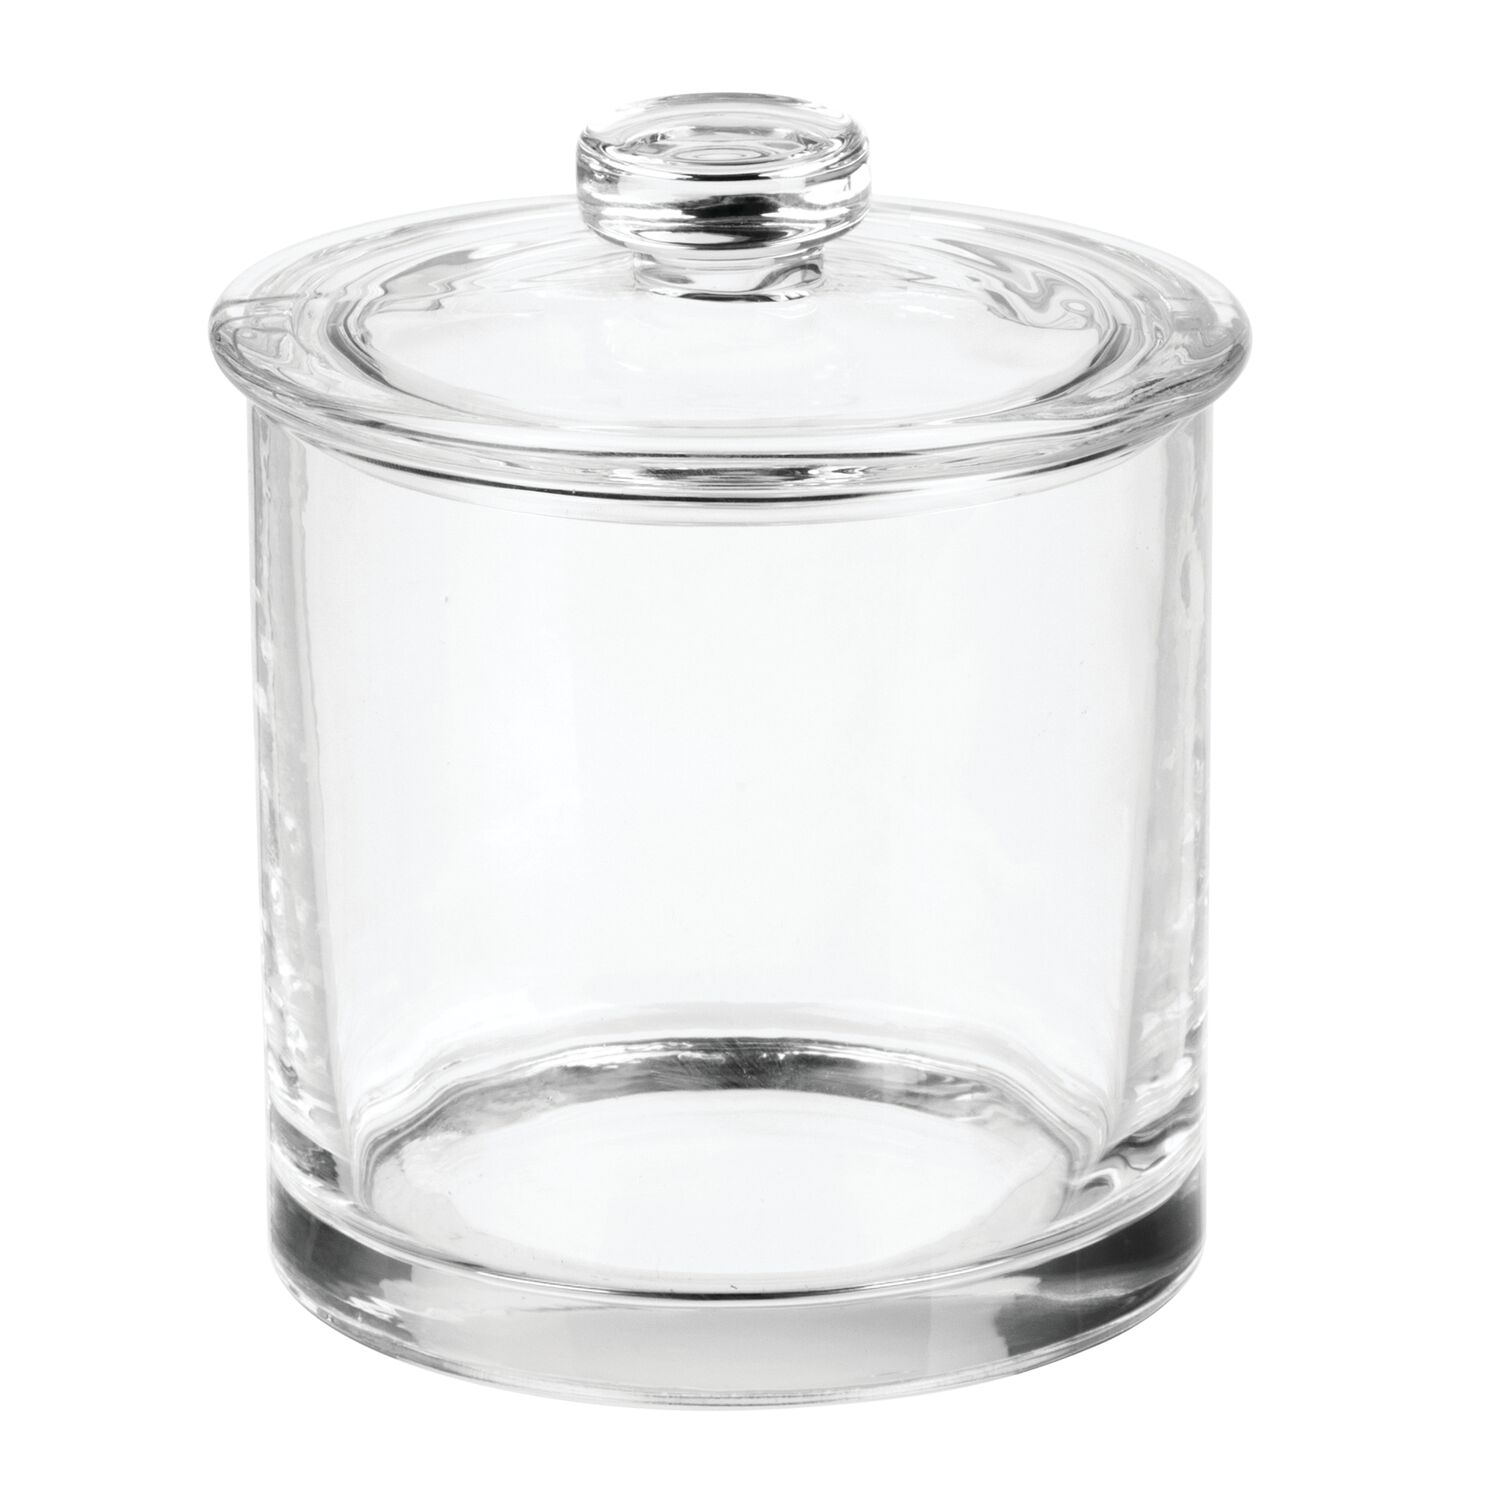 Better Homes & Gardens Small Glass Apothecary Vanity Jar, Clear - image 4 of 6